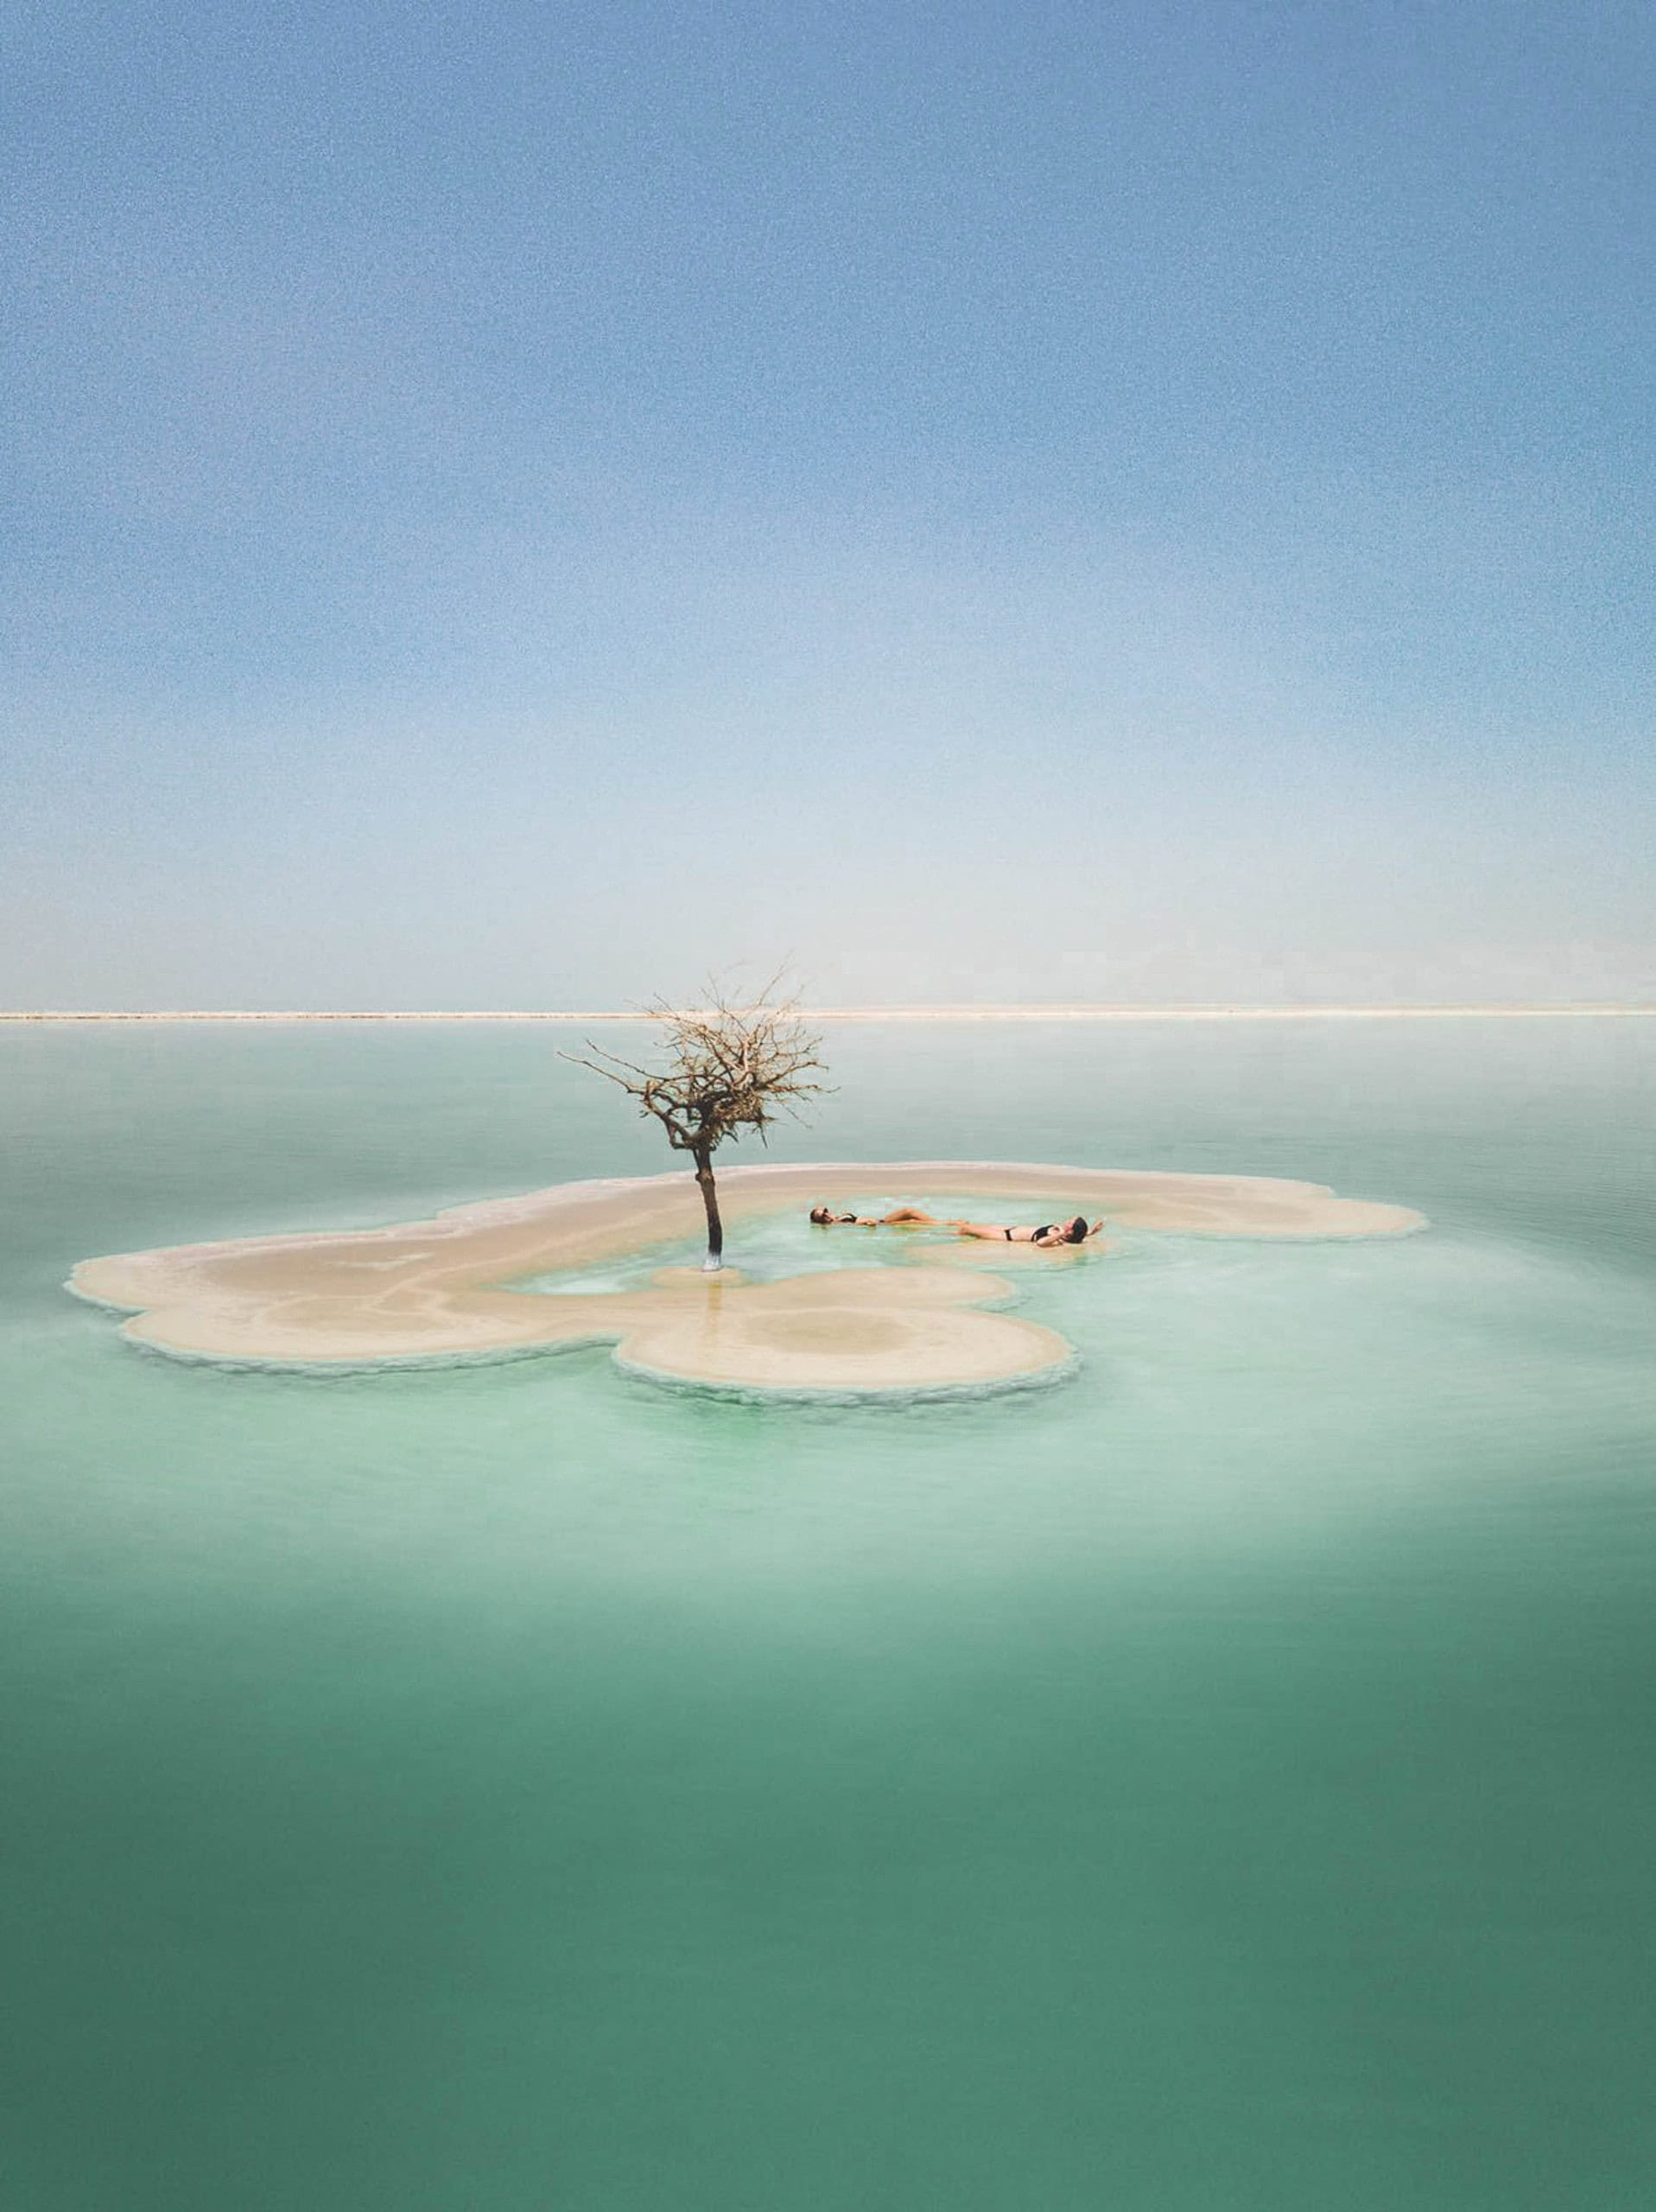 How to get a picture of a salt island in the Dead Sea